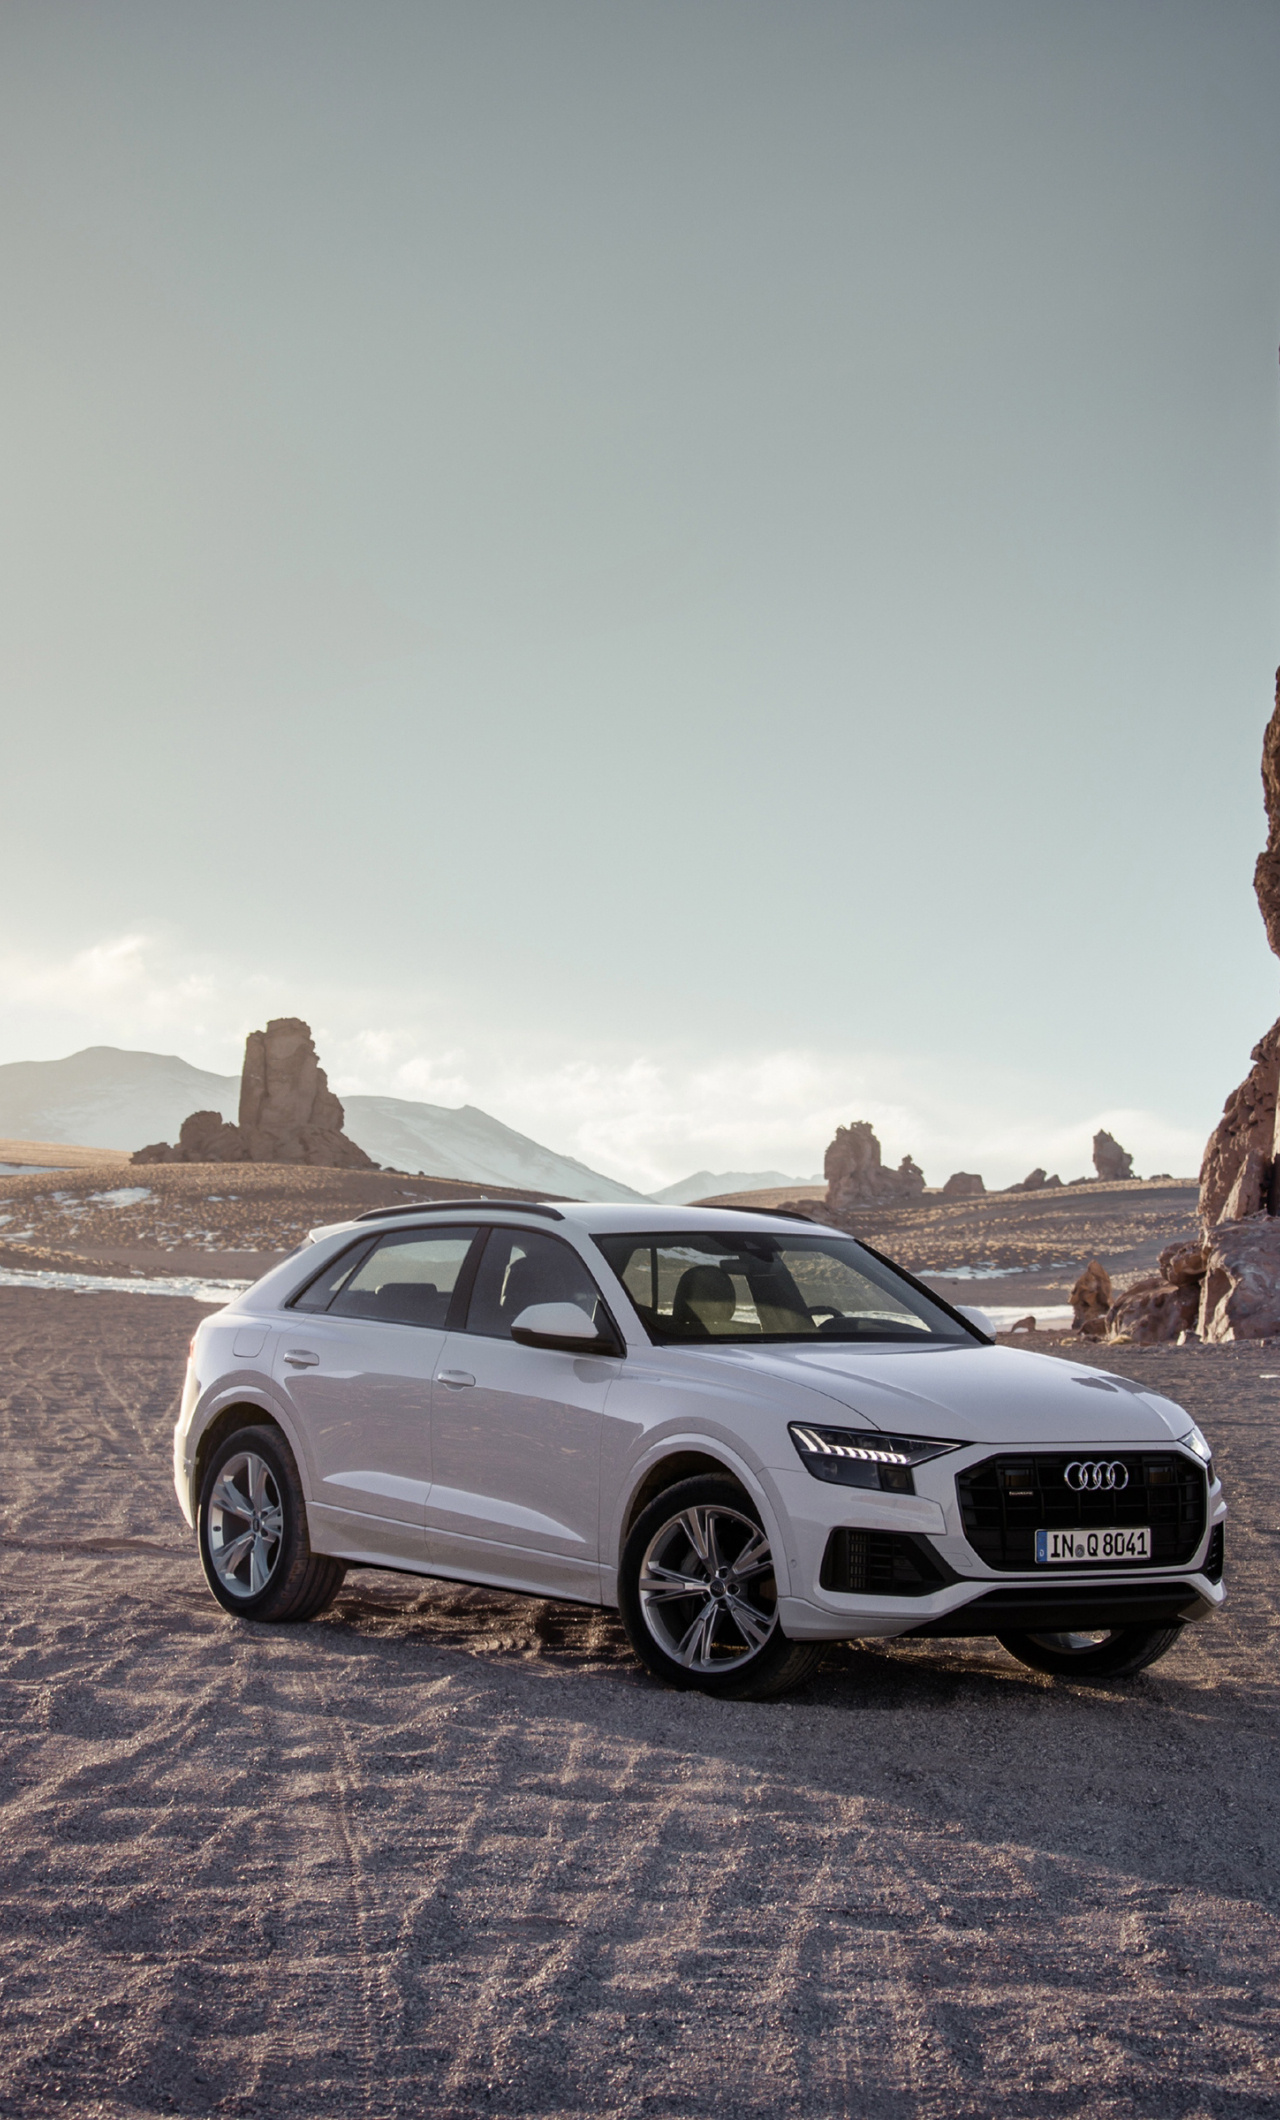 Audi Q8, Off-road capability, High-definition wallpapers, Unrivaled performance, 1280x2120 HD Phone